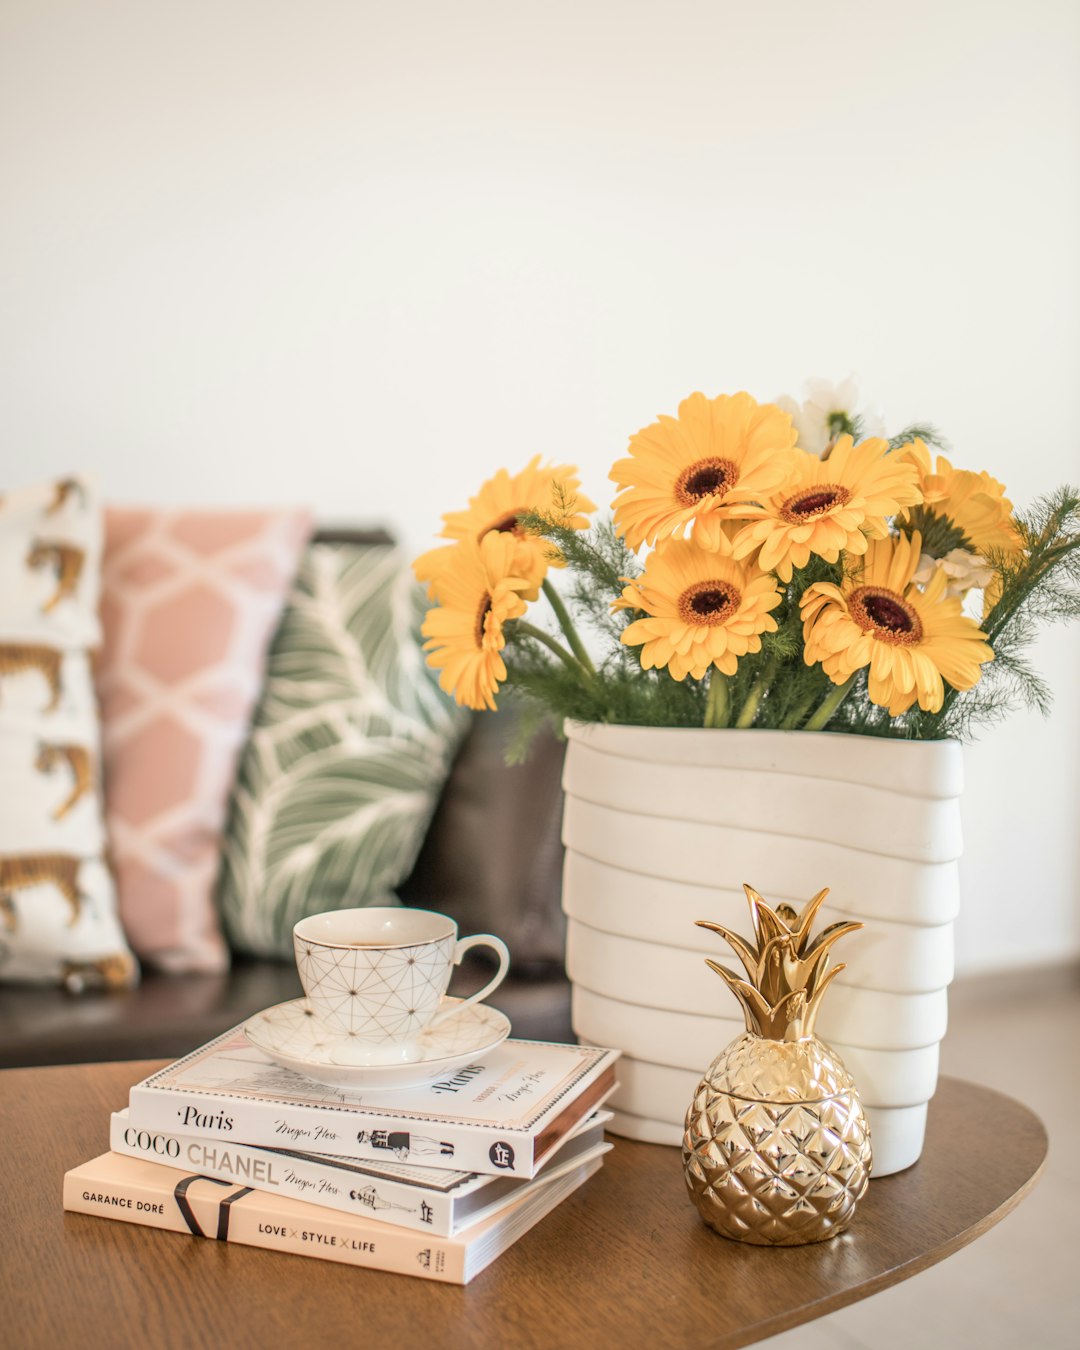 a white ceramic vase with yellow gerberas, next to it is an elegant gold pineapple and two books on the coffee table, in front of sofa with pink boho pillow, interior design aesthetic photography style